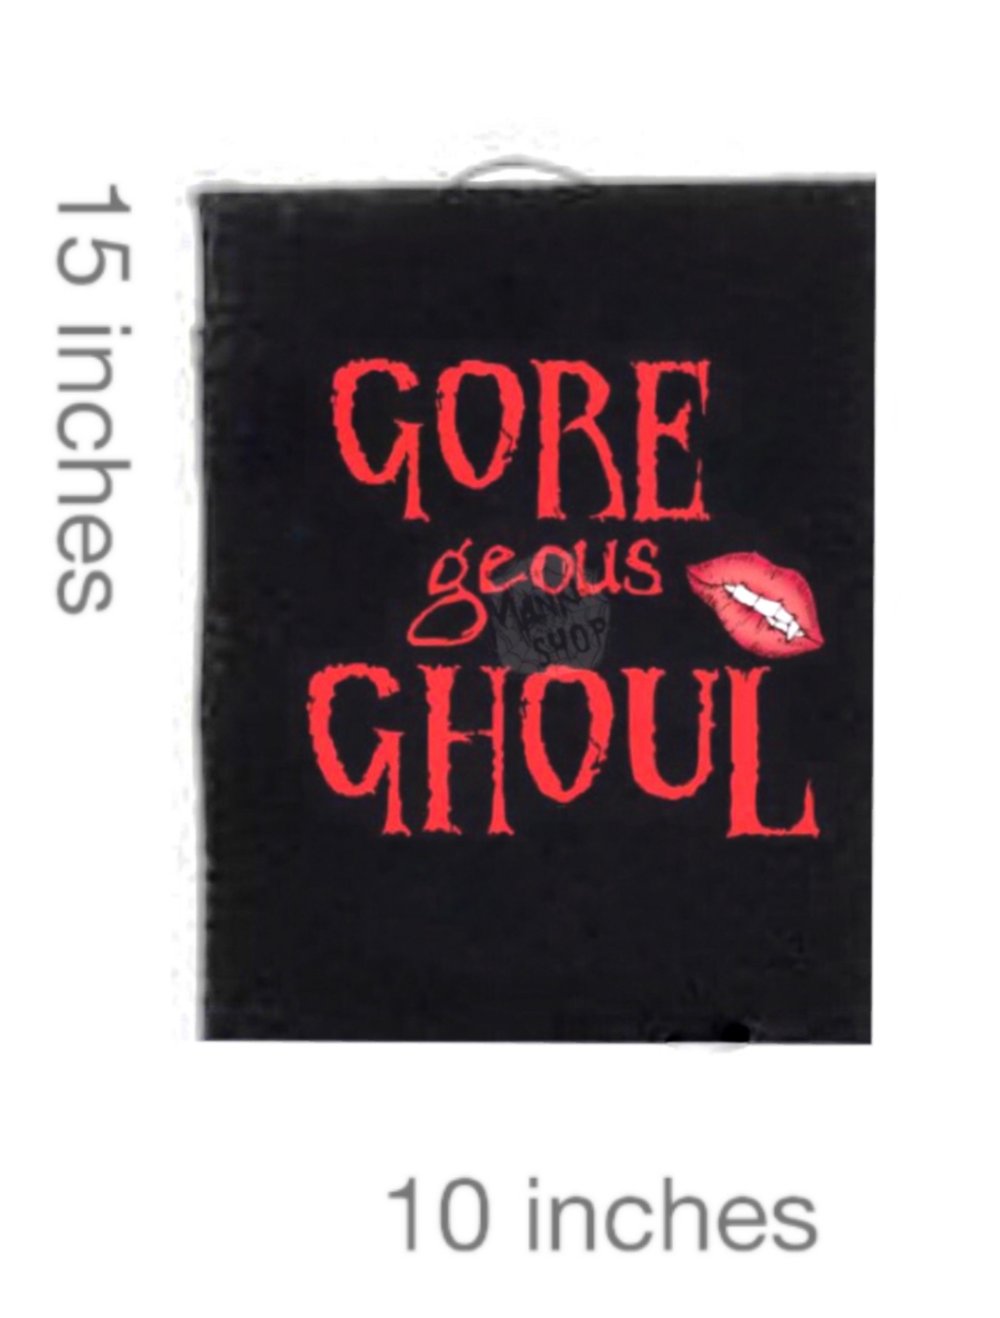 Gore-geous Ghoul Patch